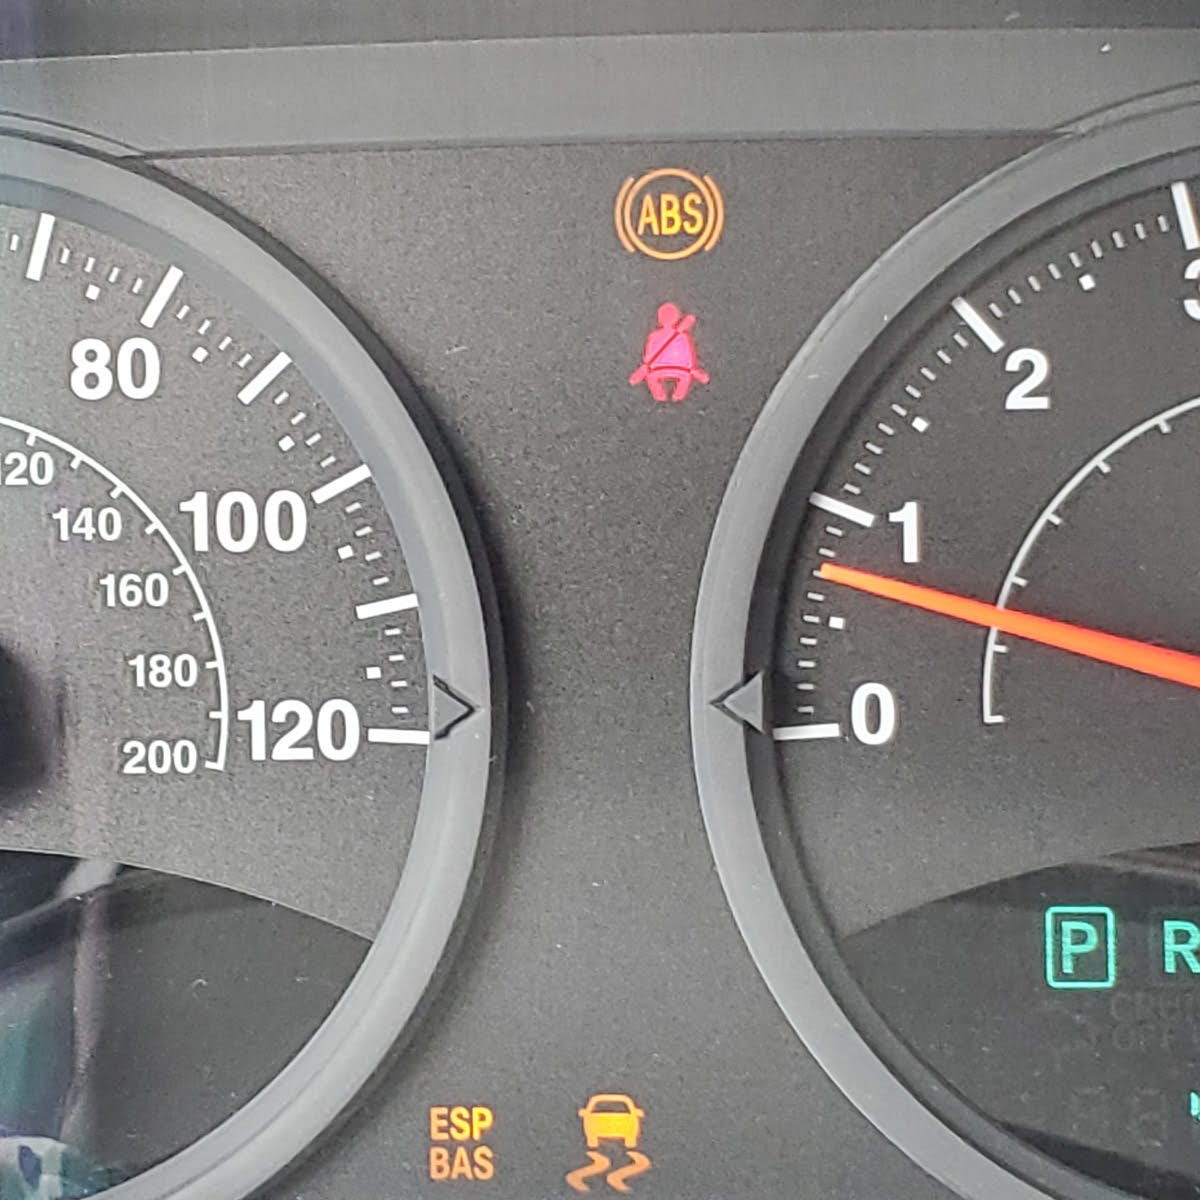 Jeep Compass Questions - 08 Jeep Compass ABS, ESPBAS,Traction control lights  on. Whats the prob... - CarGurus